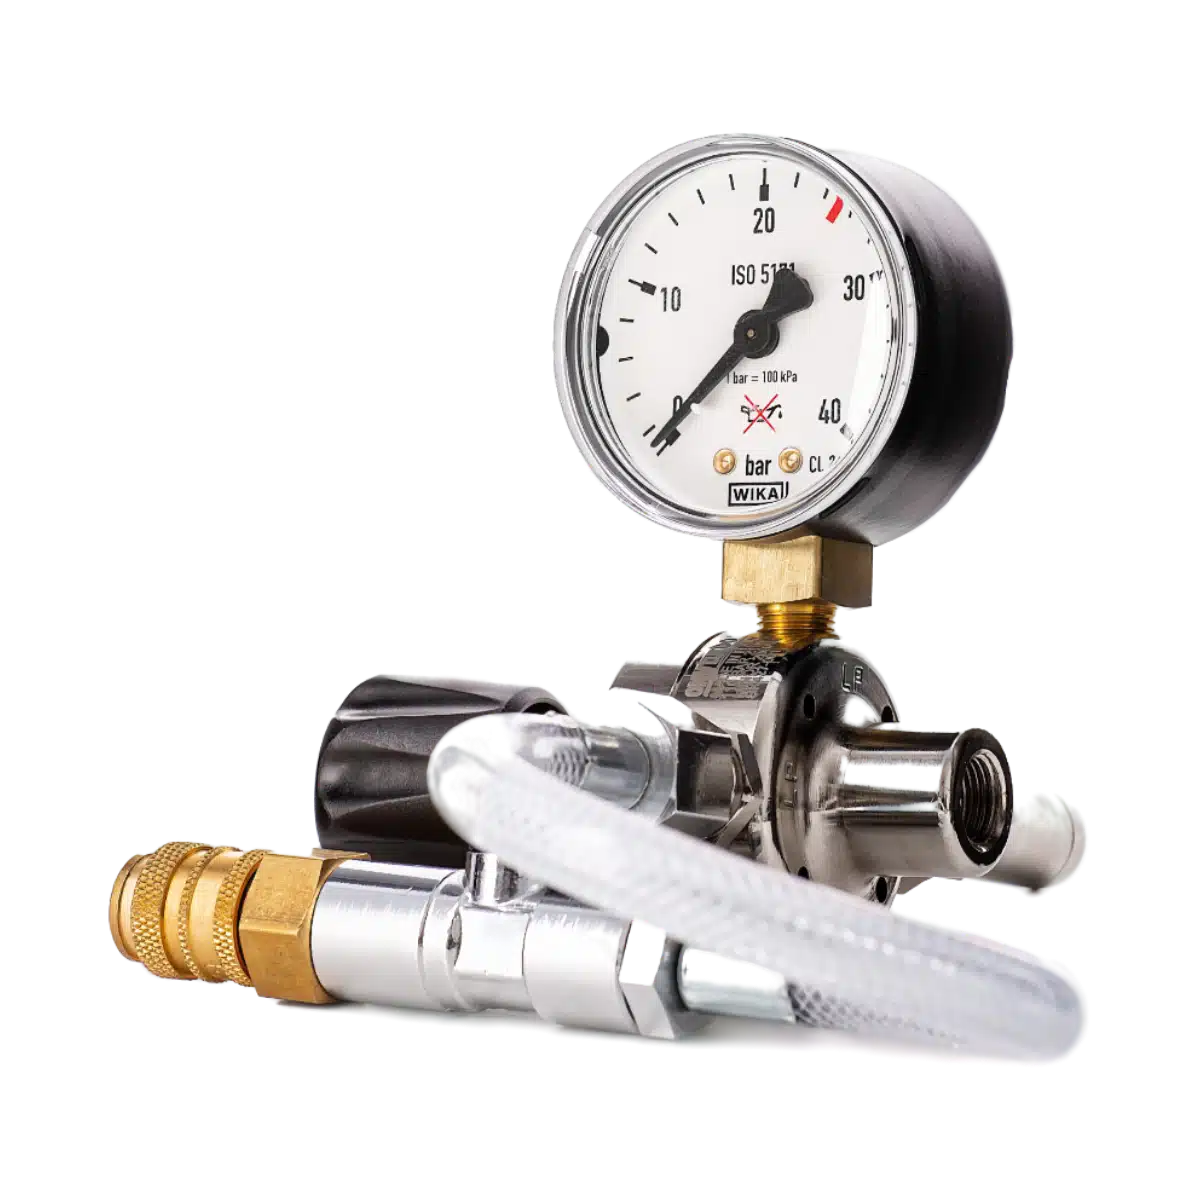 Pressure regulator with gauge hose and nozzles